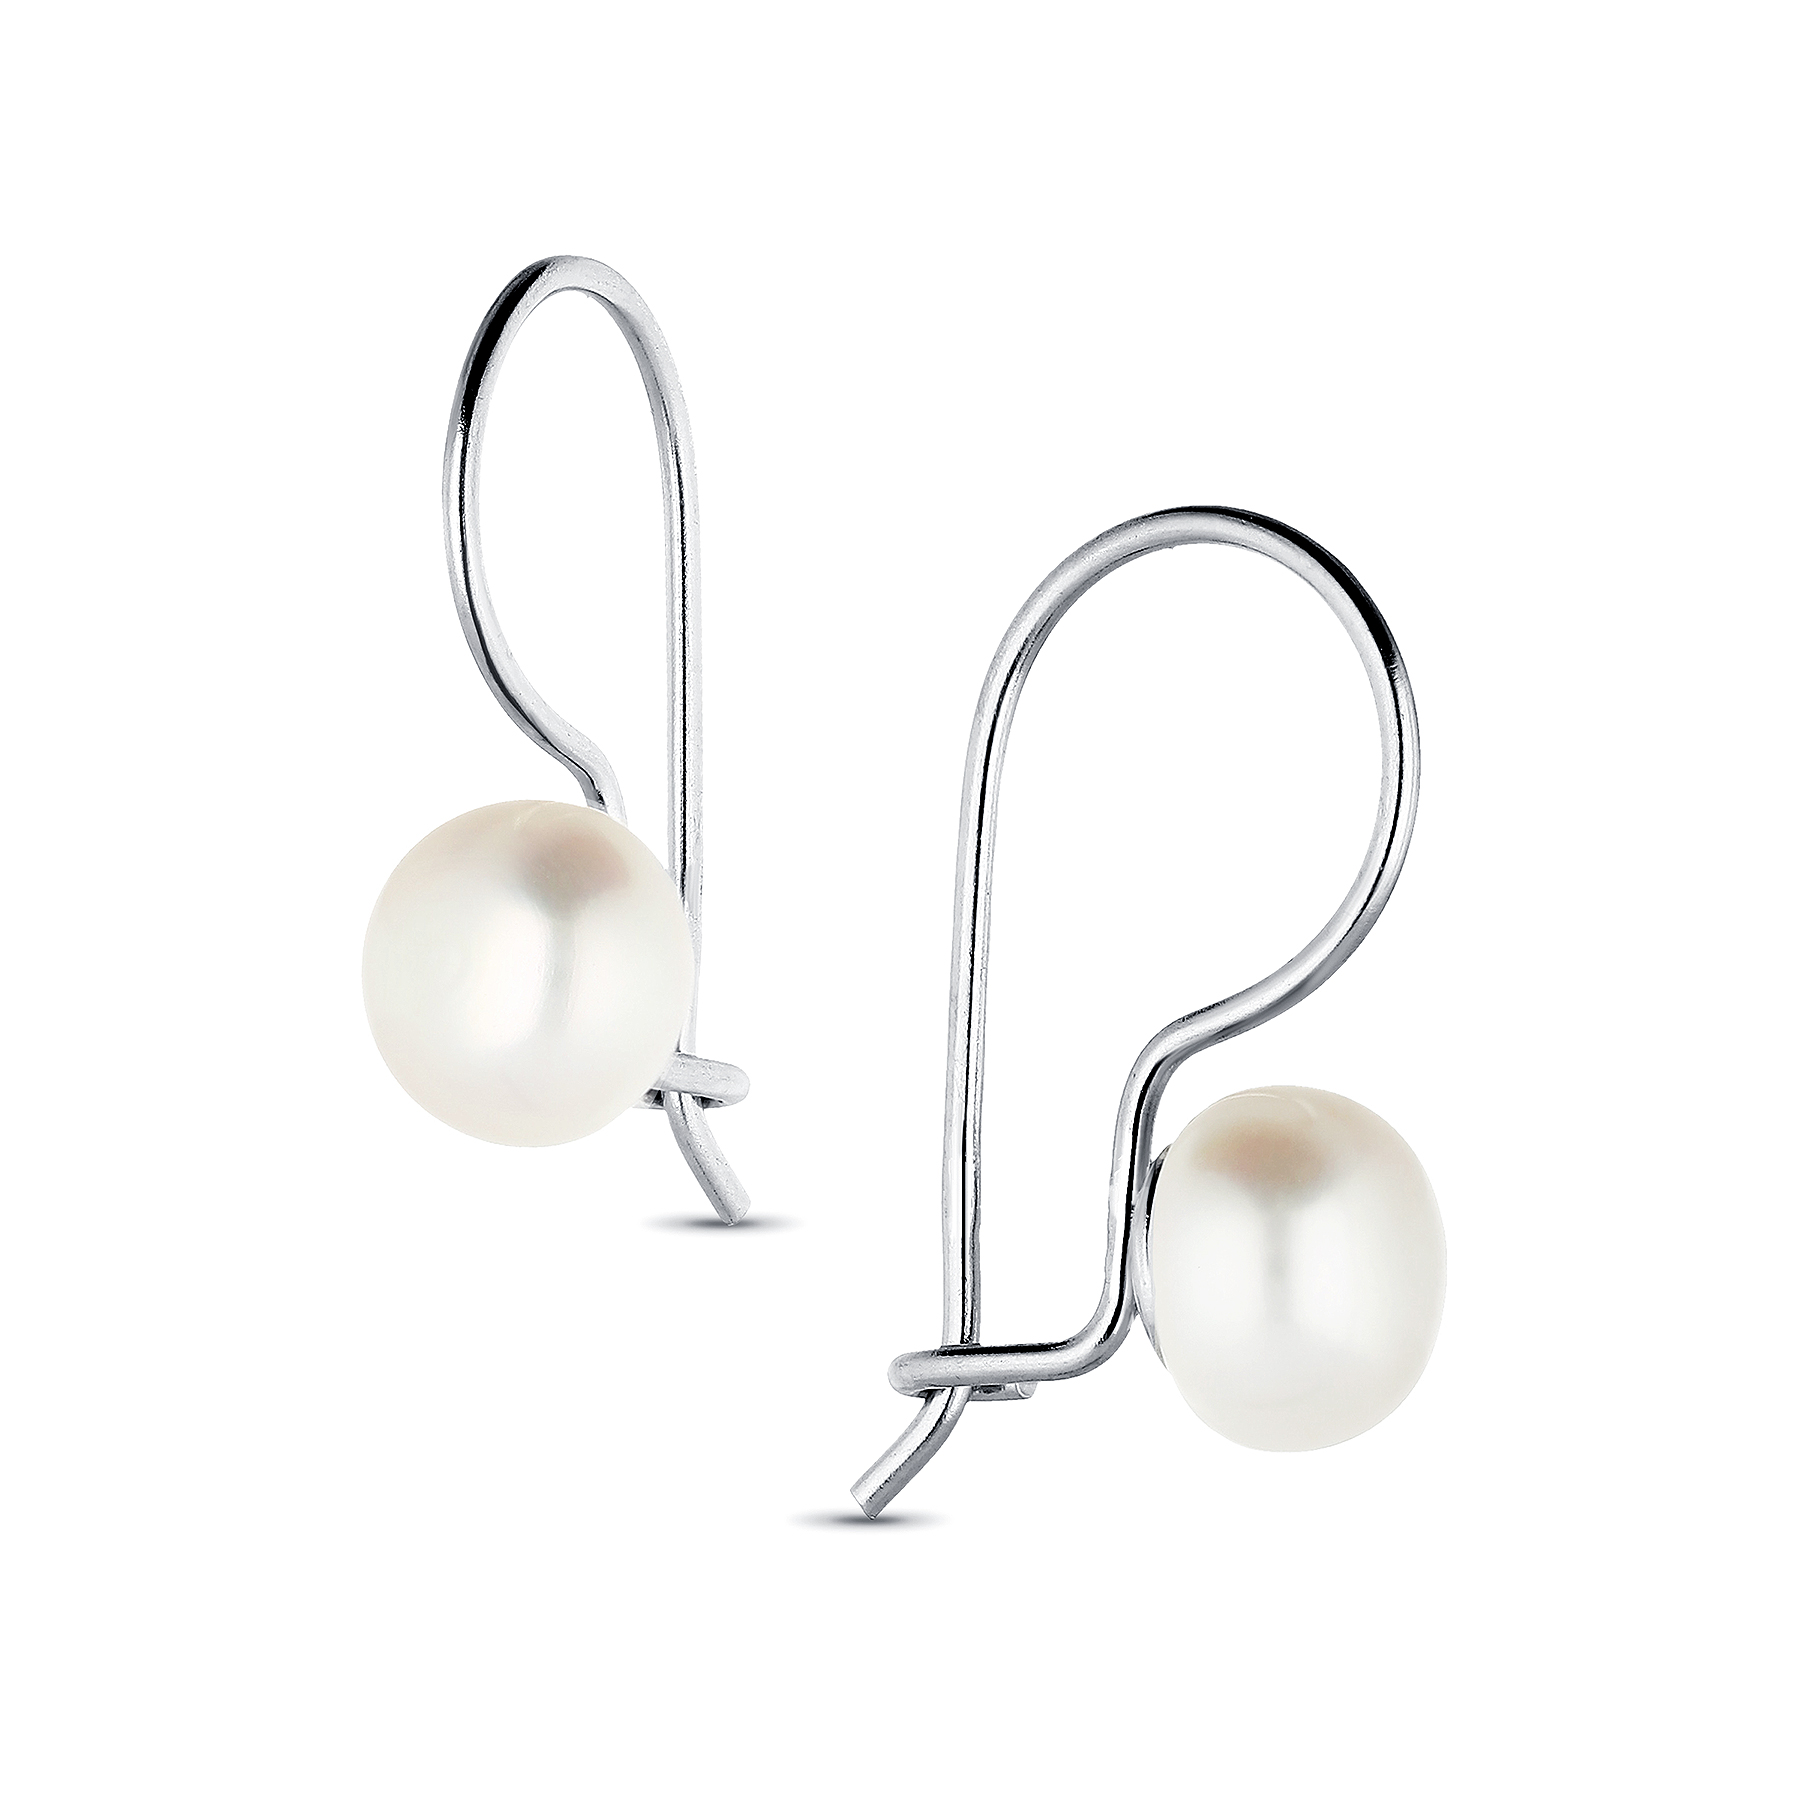 382-5078K - Wholesale 925 Sterling Silver Kidney Earrings Decorated With Fresh Water Pearls